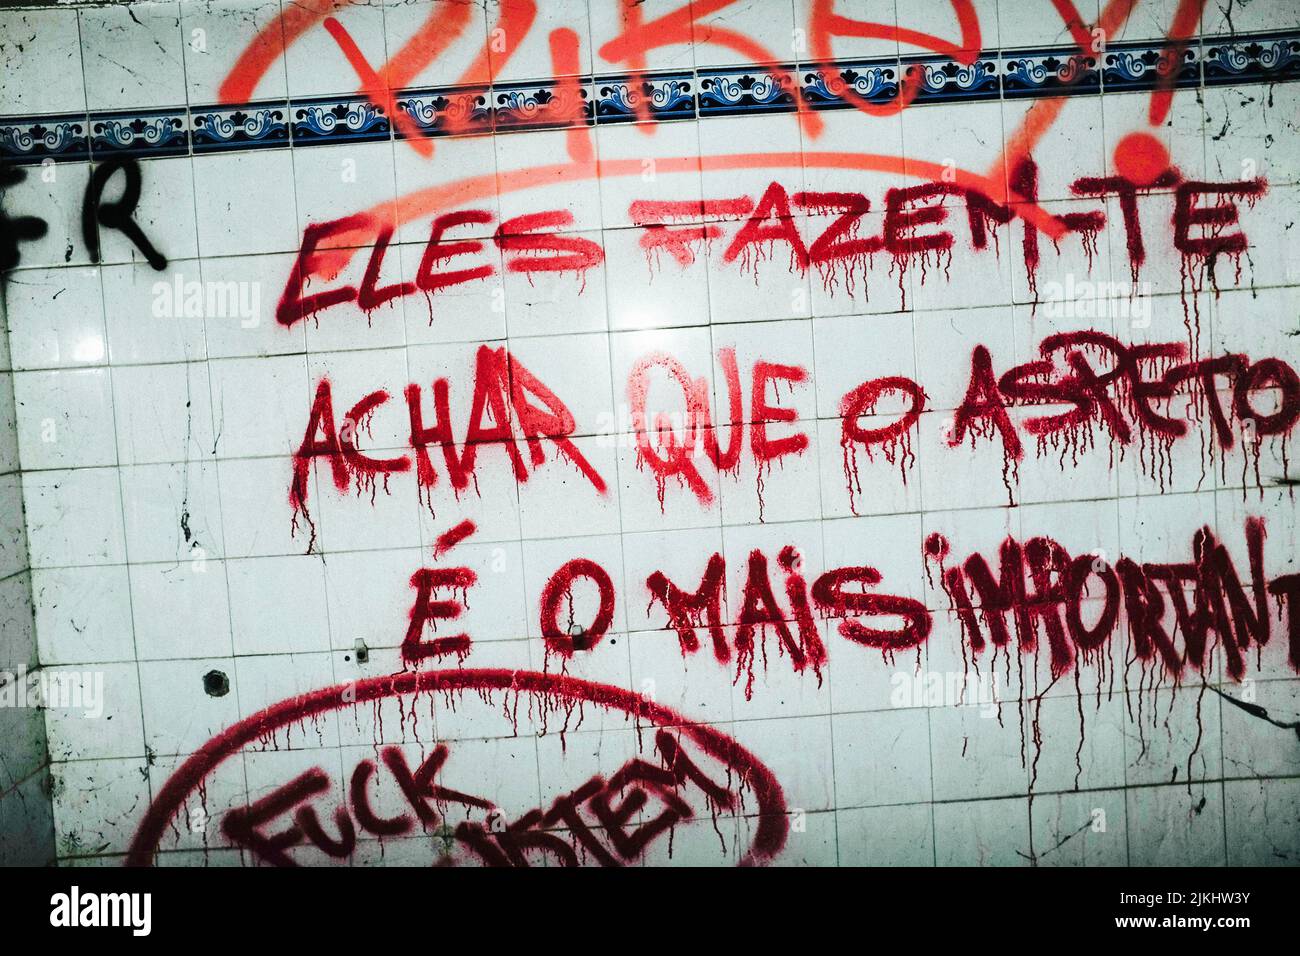 Red graffiti words in Portuguese painted on an old dirty white tiled wall Stock Photo